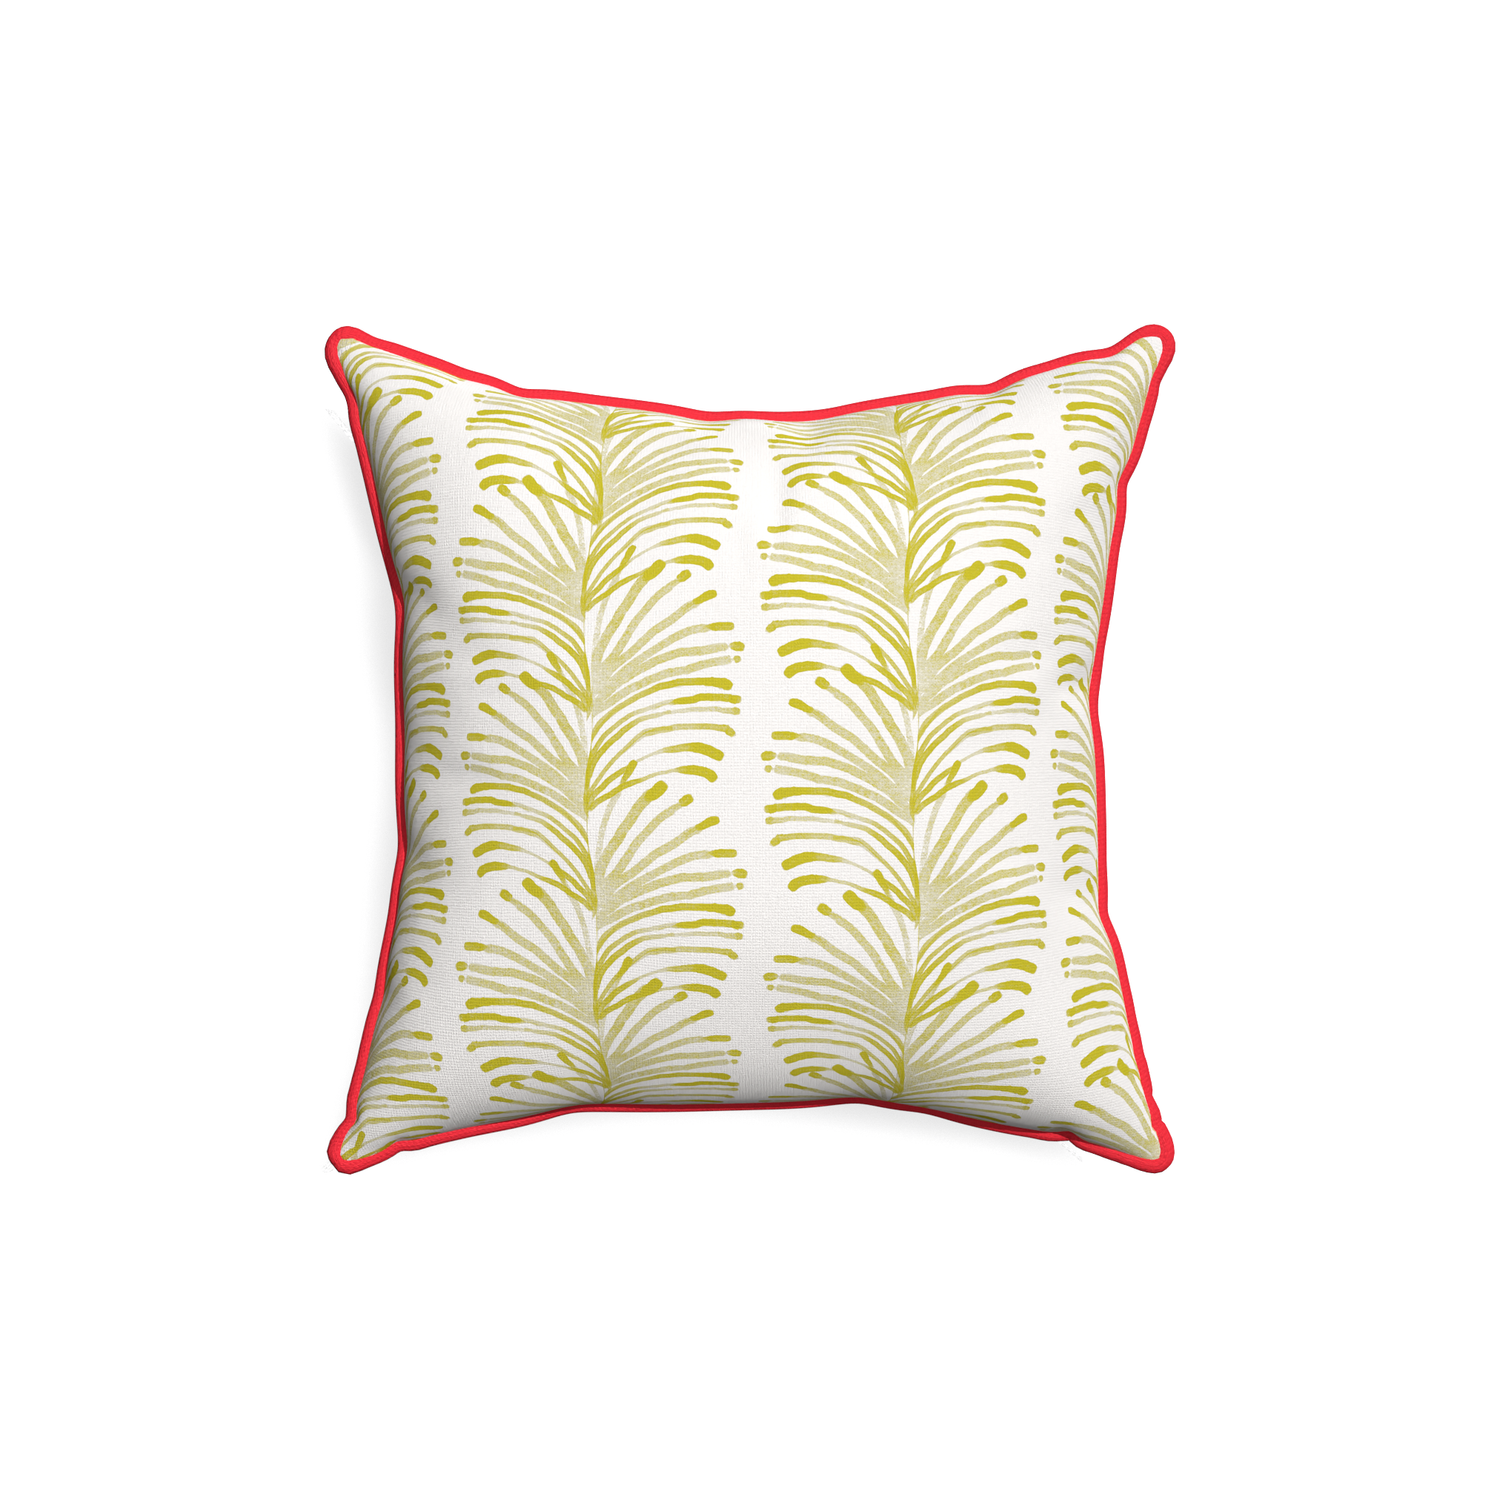 18-square emma chartreuse custom pillow with cherry piping on white background